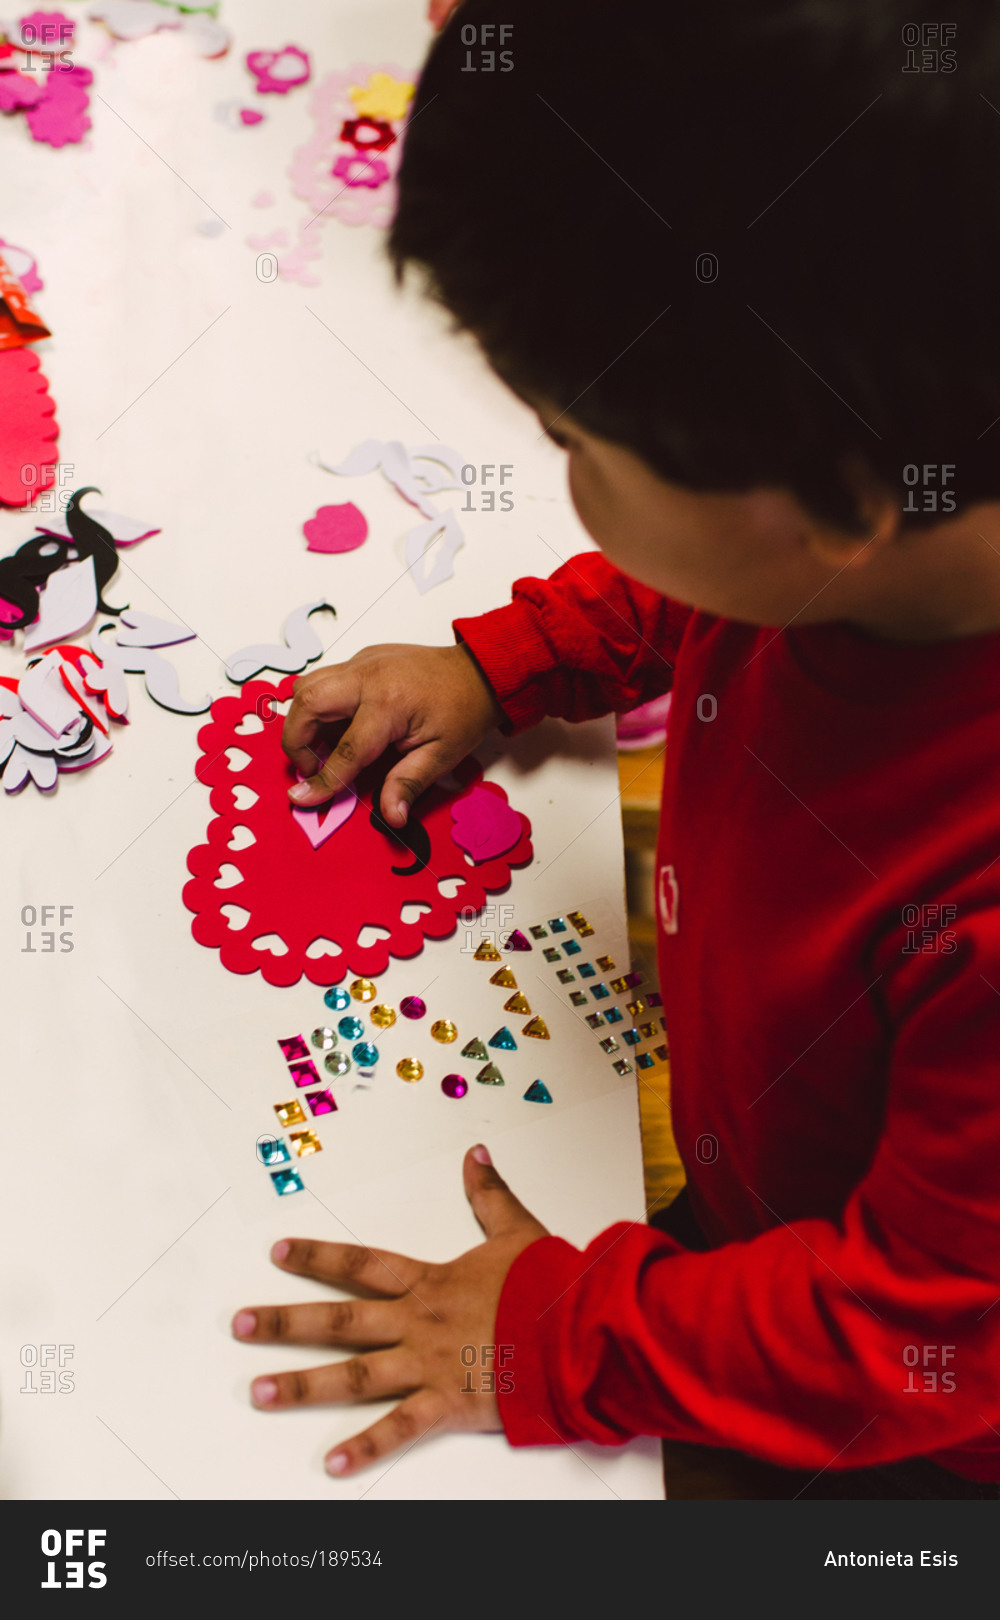 A little boy works on a Valentine's Day project